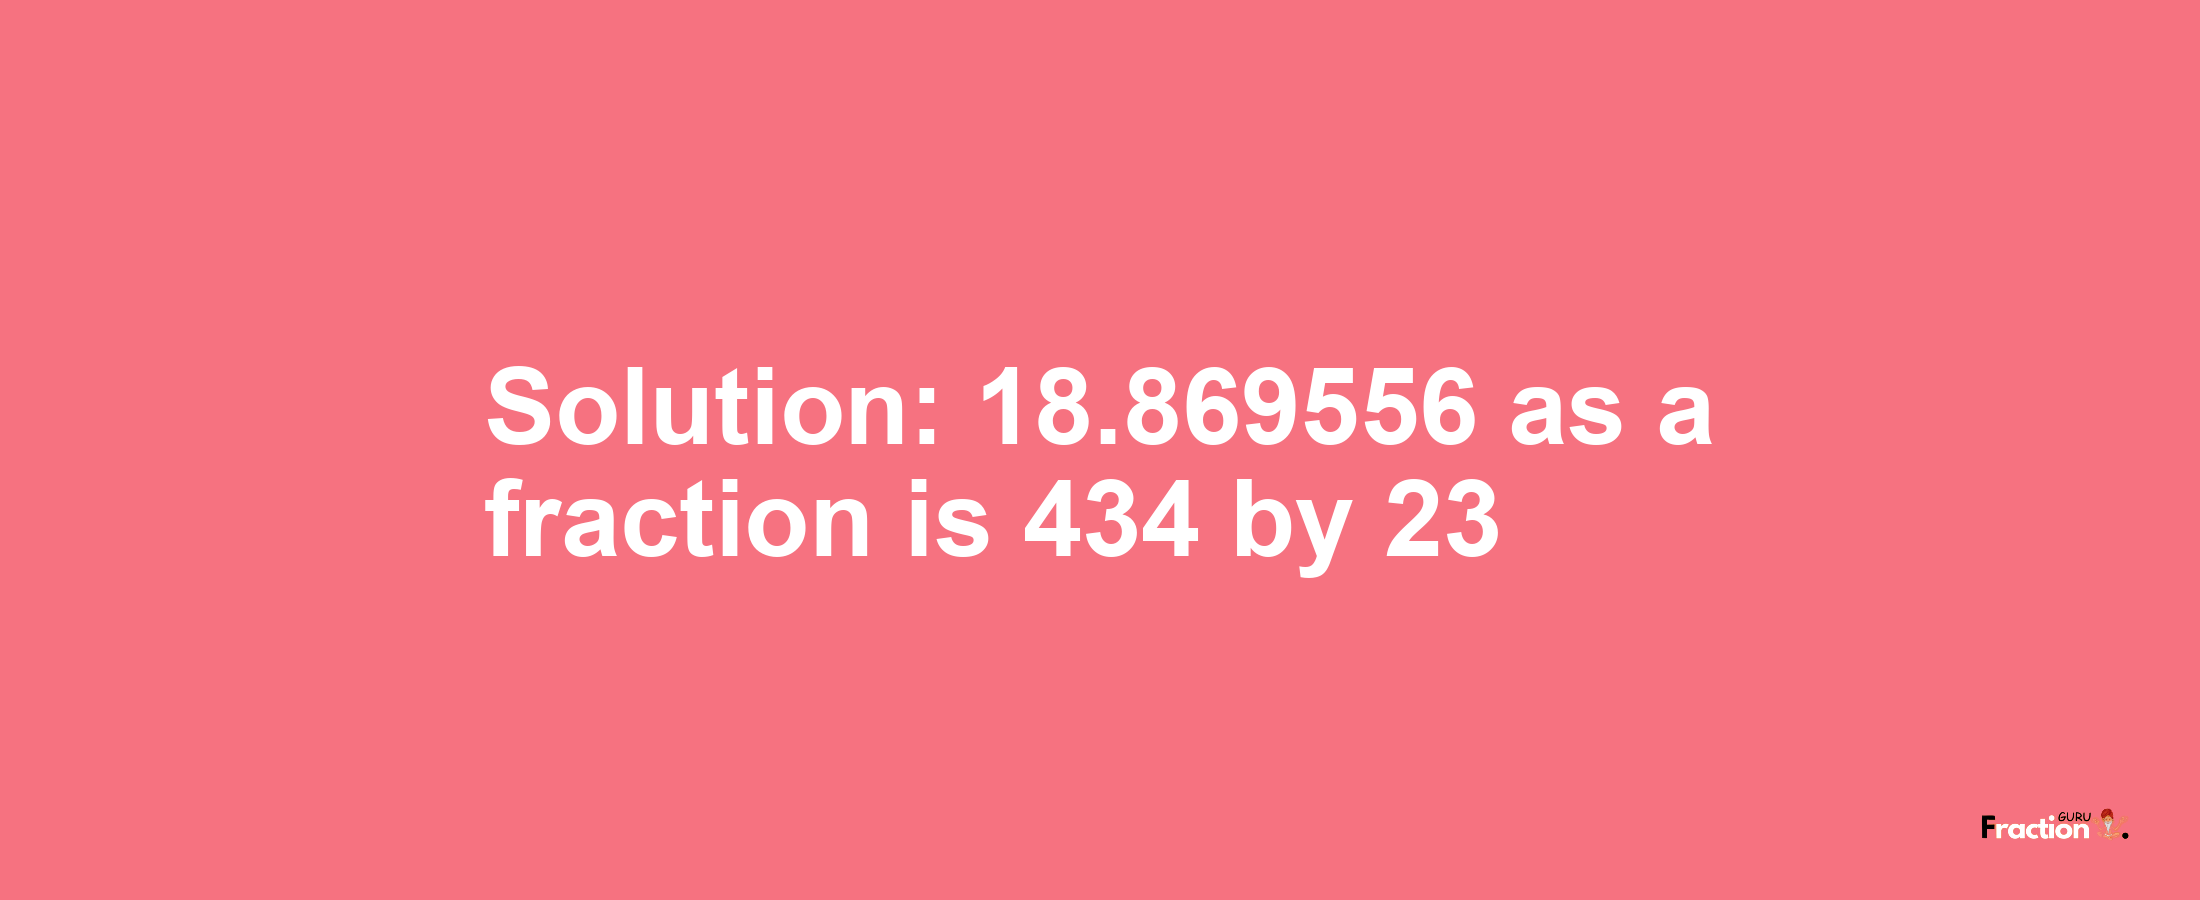 Solution:18.869556 as a fraction is 434/23